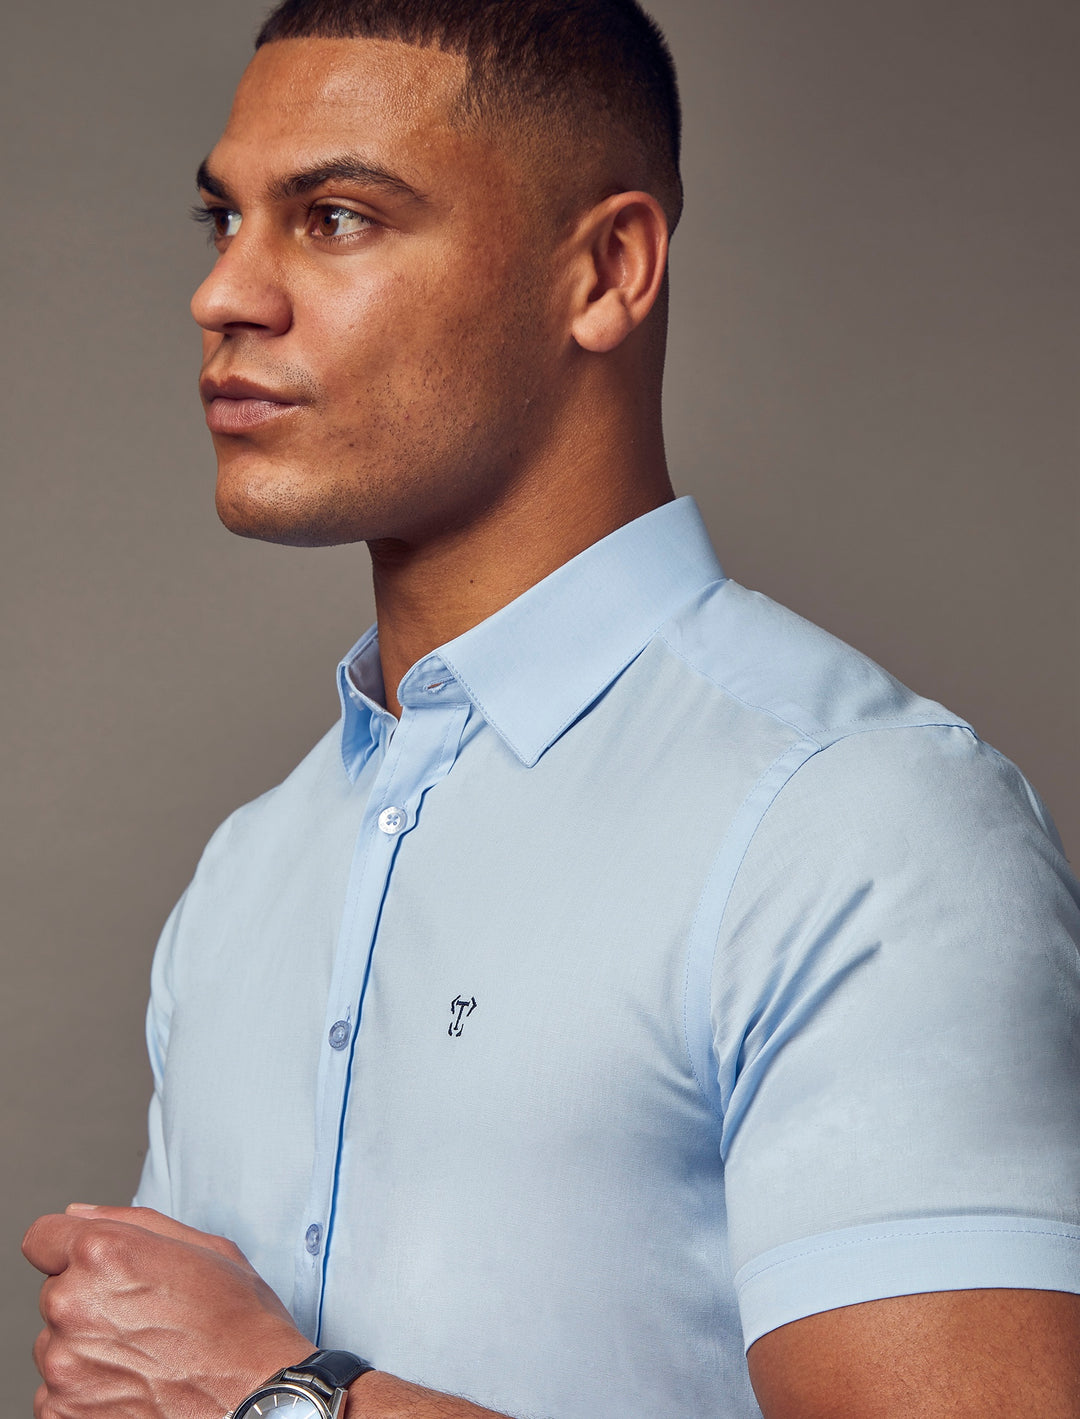 blue muscle fit short sleeve shirt close up shot, highlighting the tapered fit and superior quality offered by Tapered Menswear for athletic men